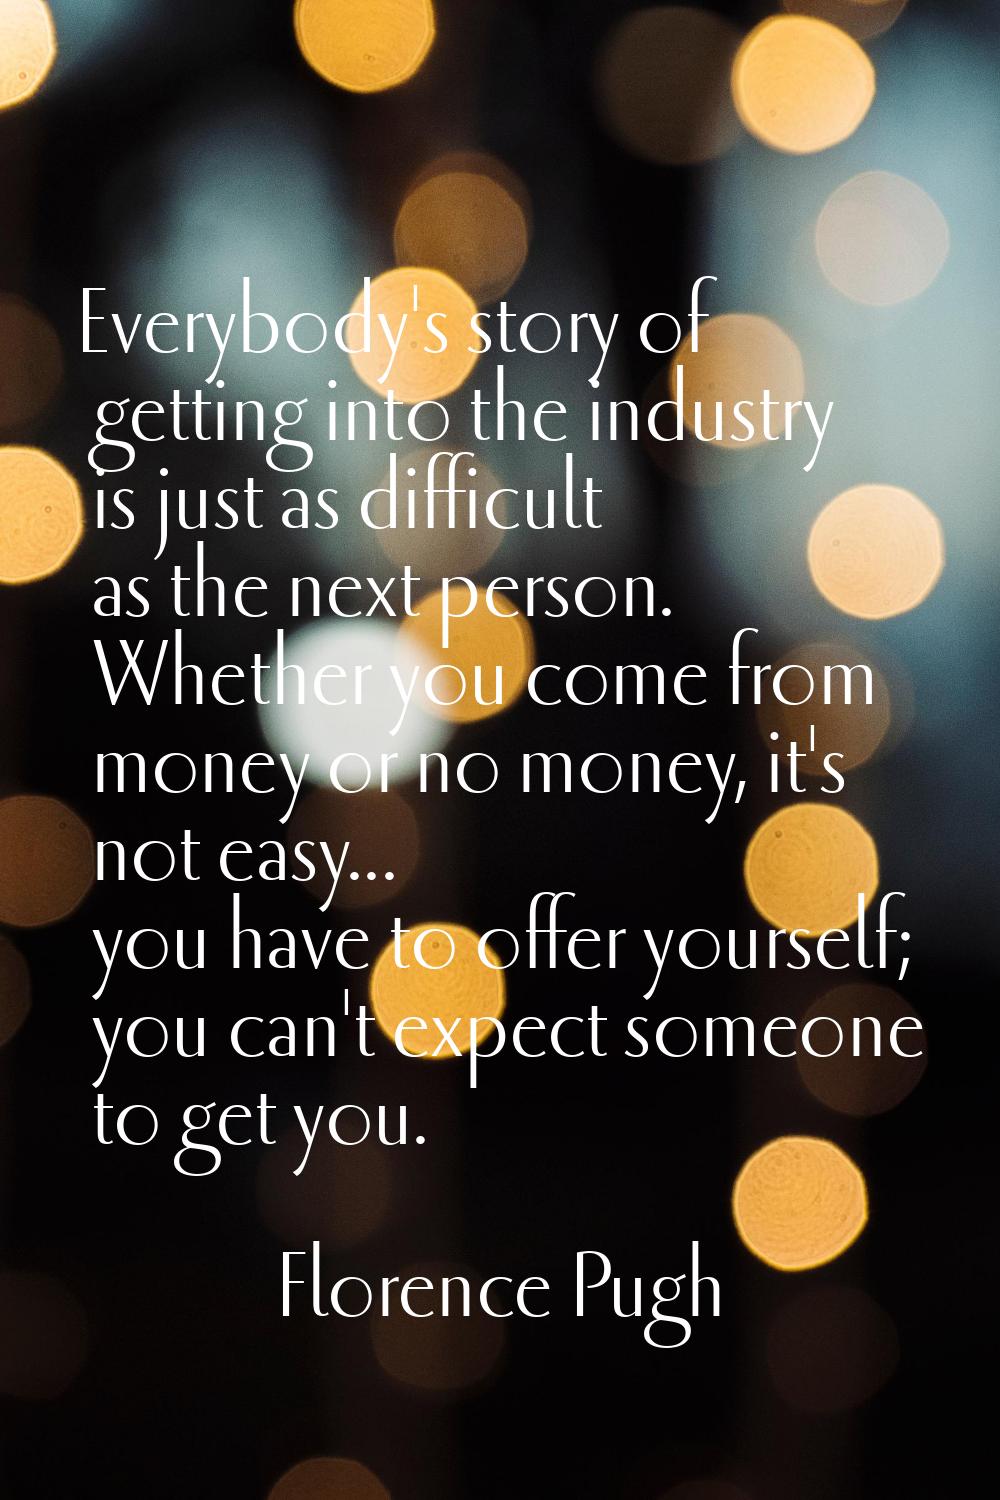 Everybody's story of getting into the industry is just as difficult as the next person. Whether you